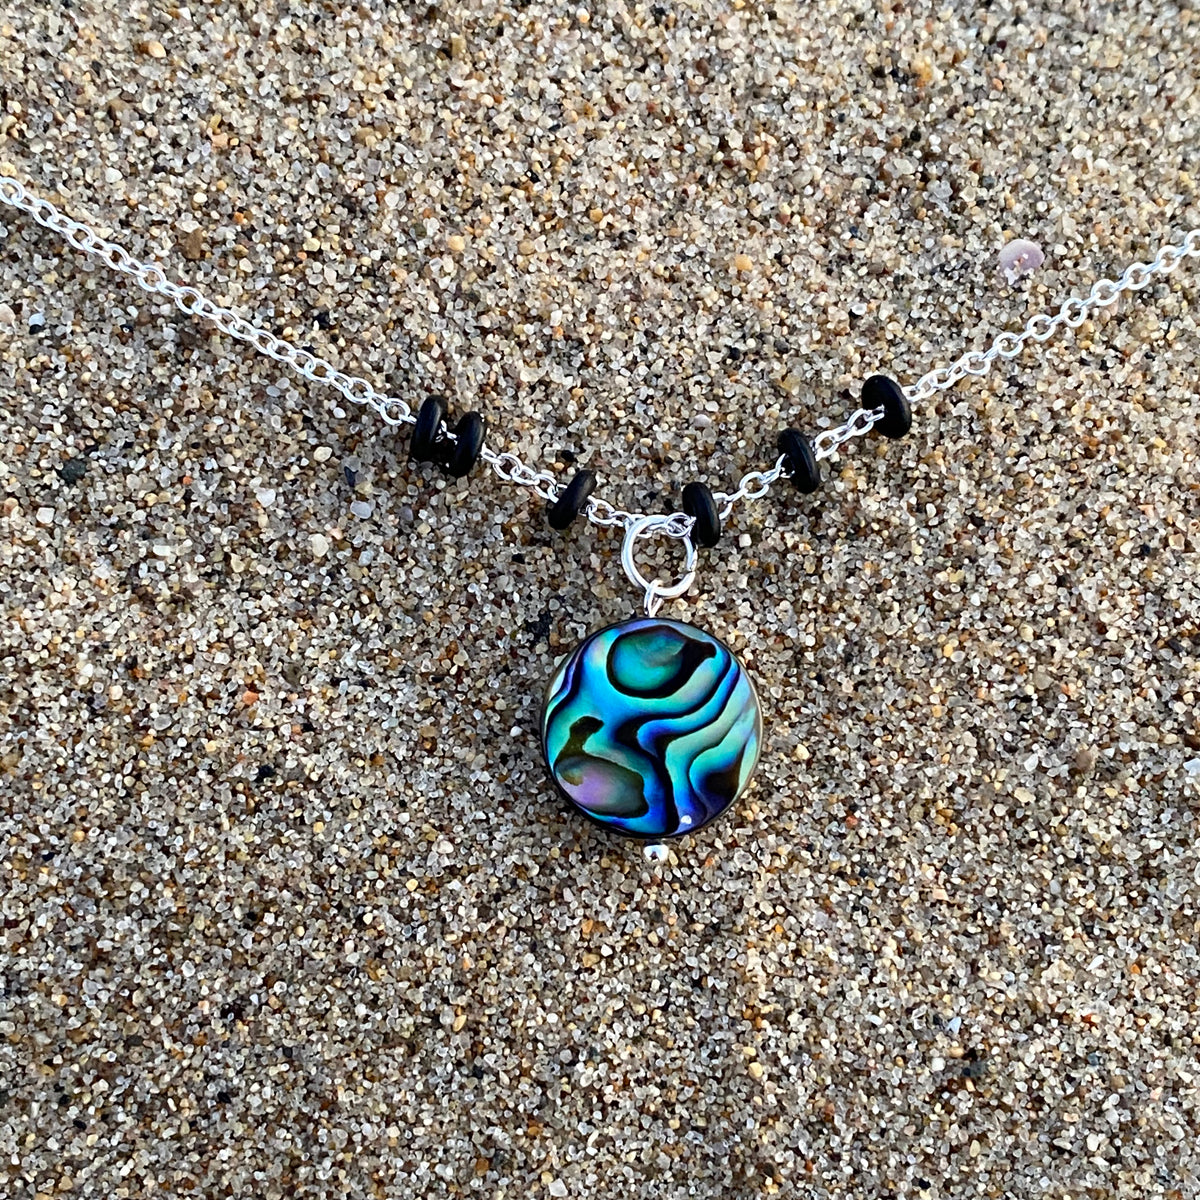 Zero Waste Abalone Necklace with Upcycled Scuba Gear O-rings